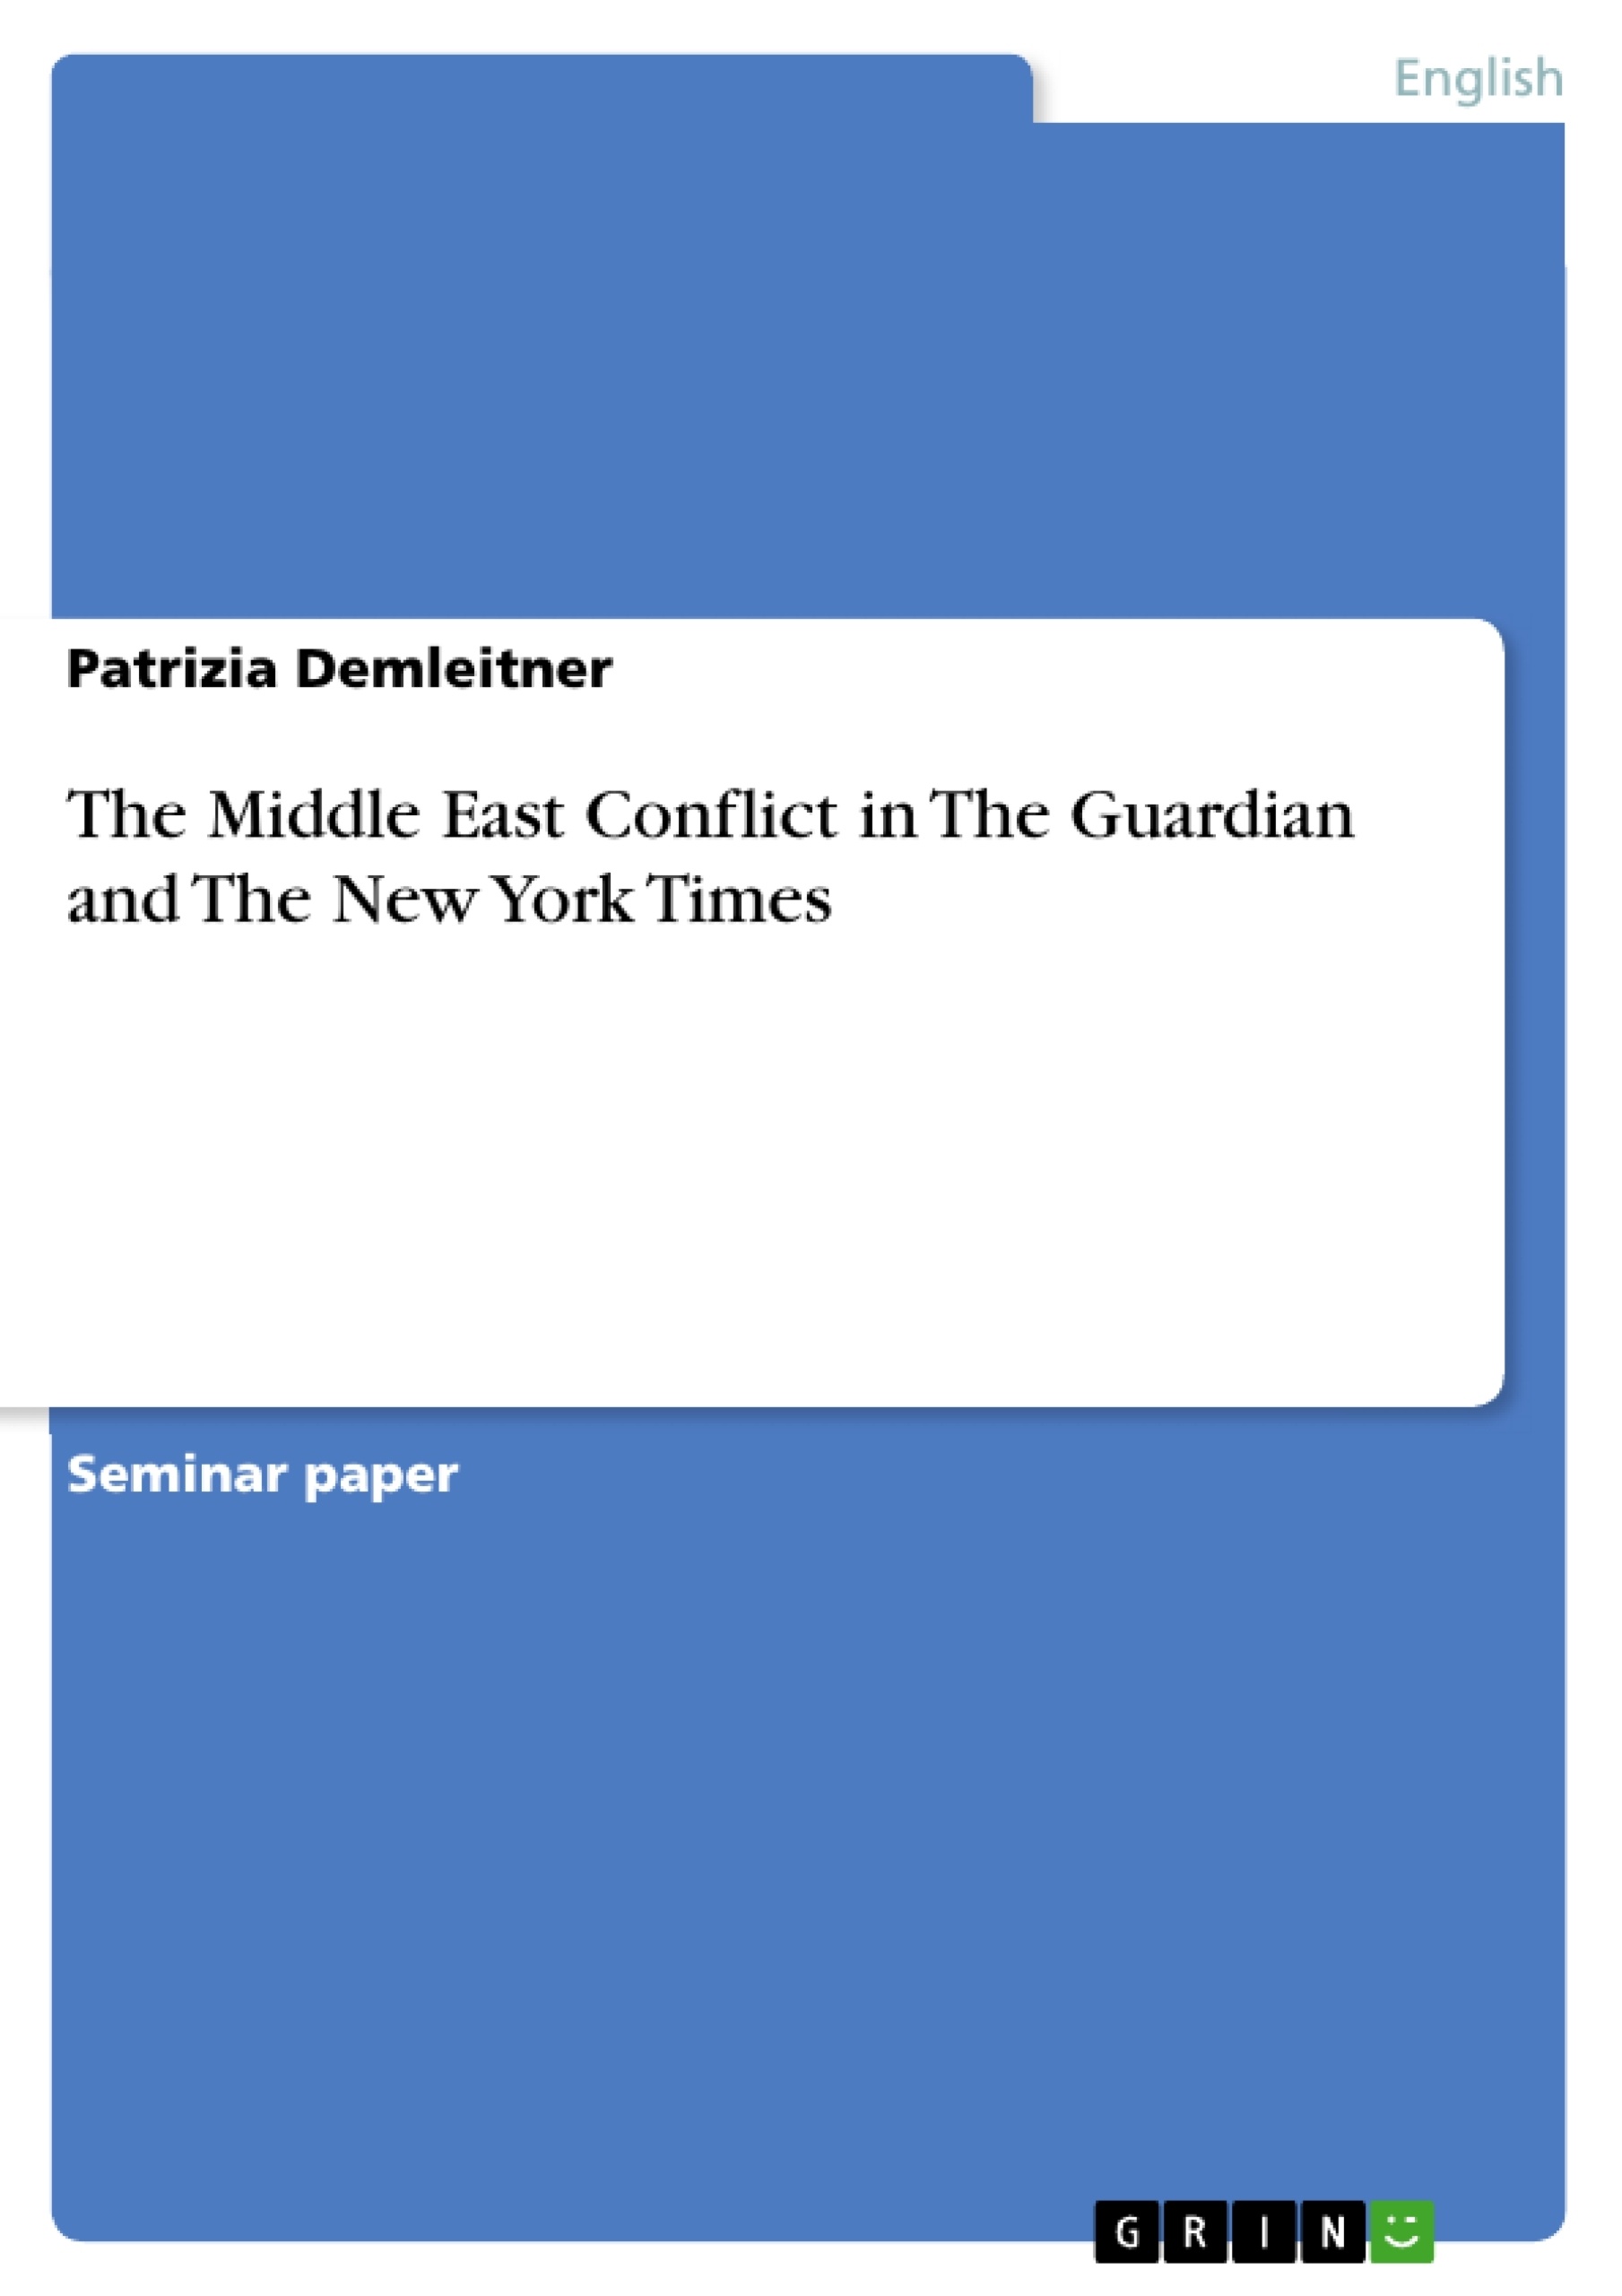 Title: The Middle East Conflict in The Guardian and The New York Times